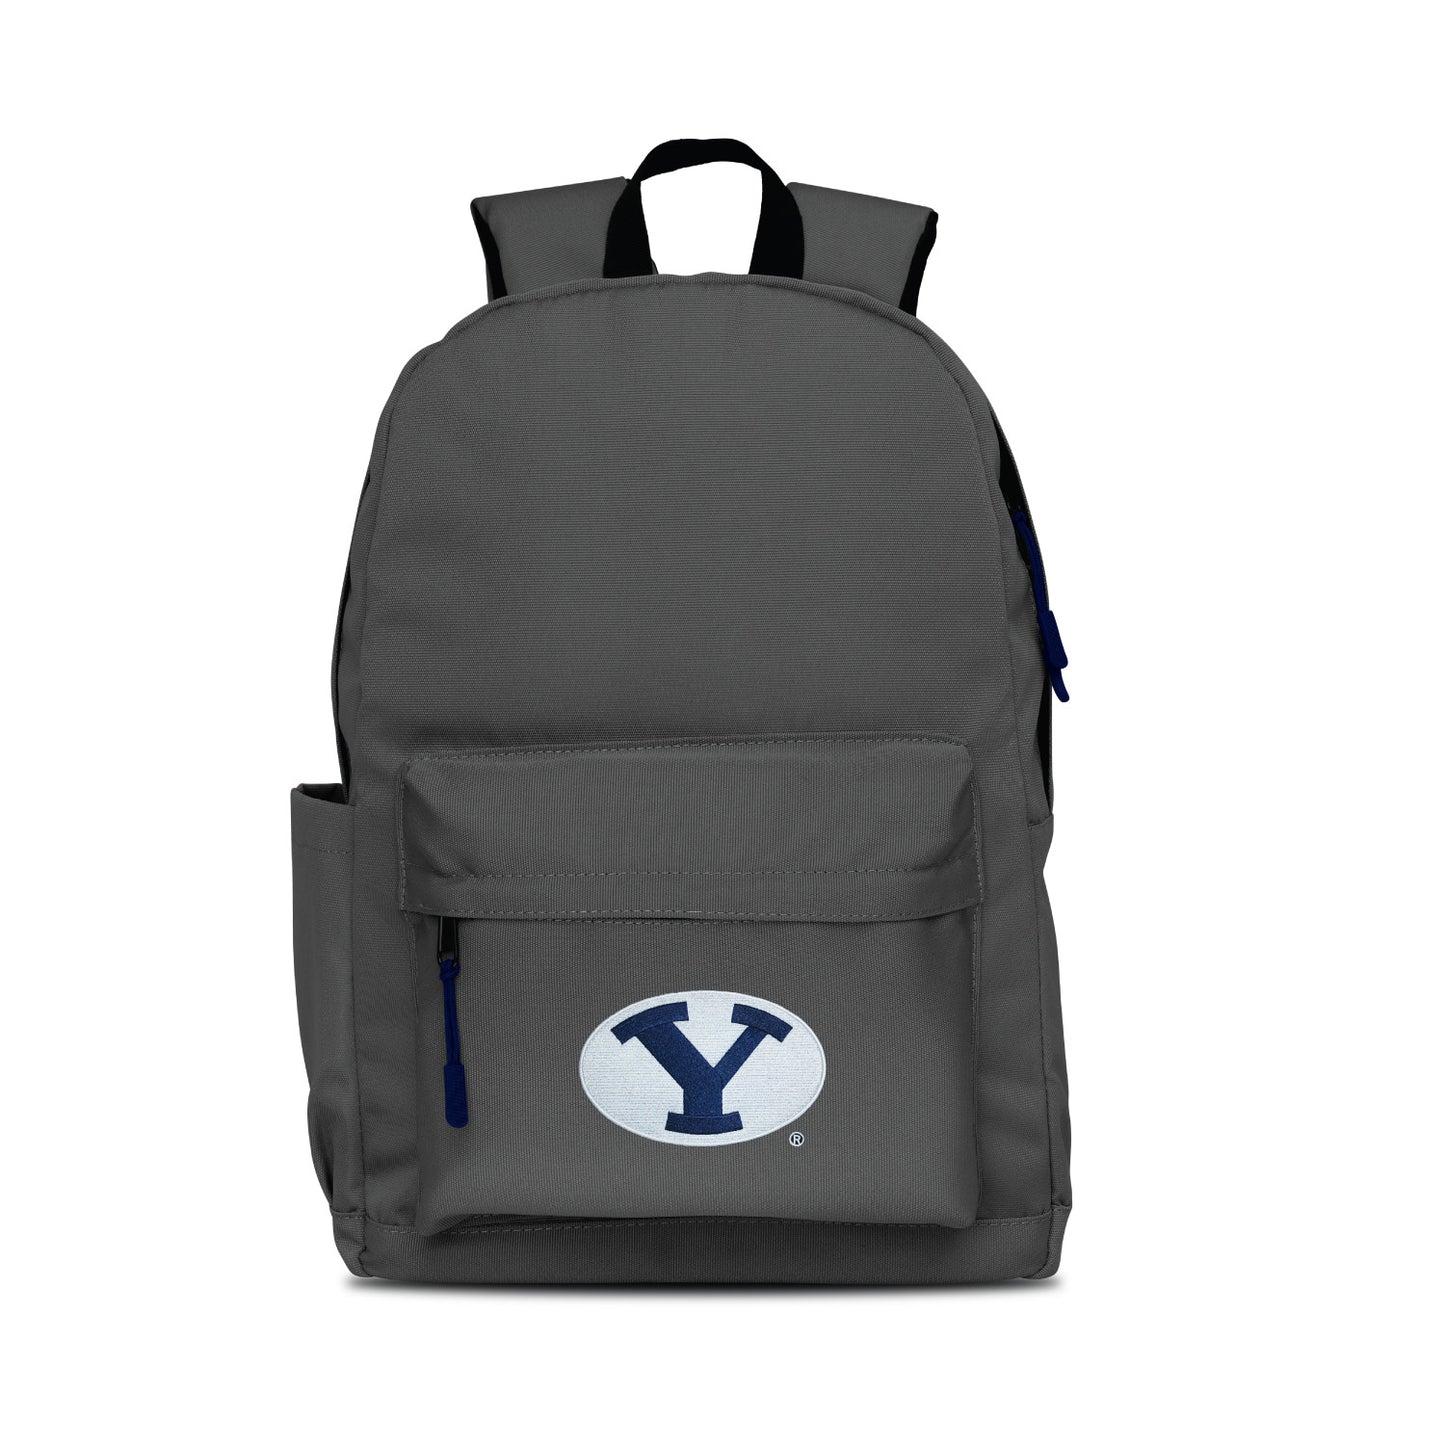 BYU Cougars Campus Laptop Backpack- Gray